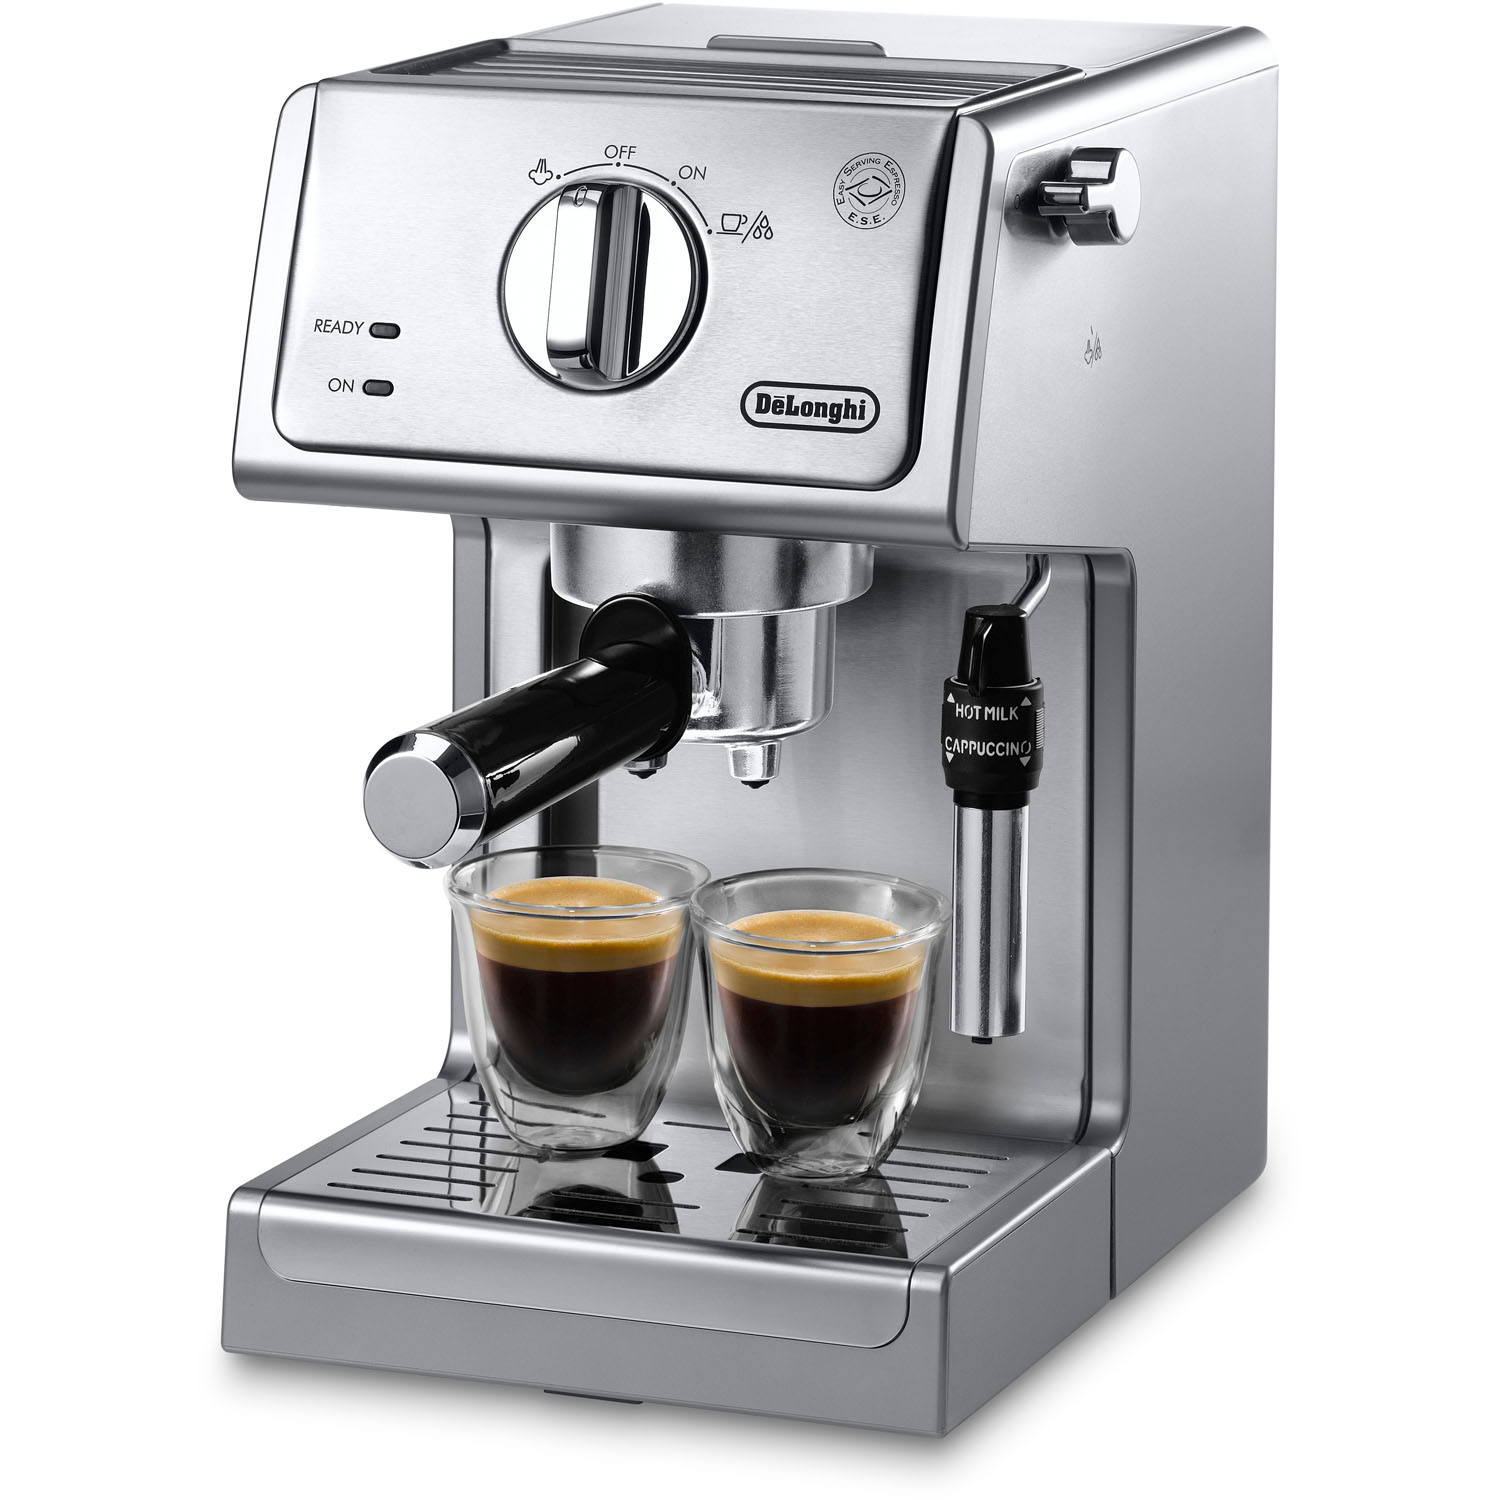 DeLONGHI ECP3630 15-Bar Pump Espresso and Cappuccino Machine, Stainless Delonghi Stainless Steel Pump Espresso Maker